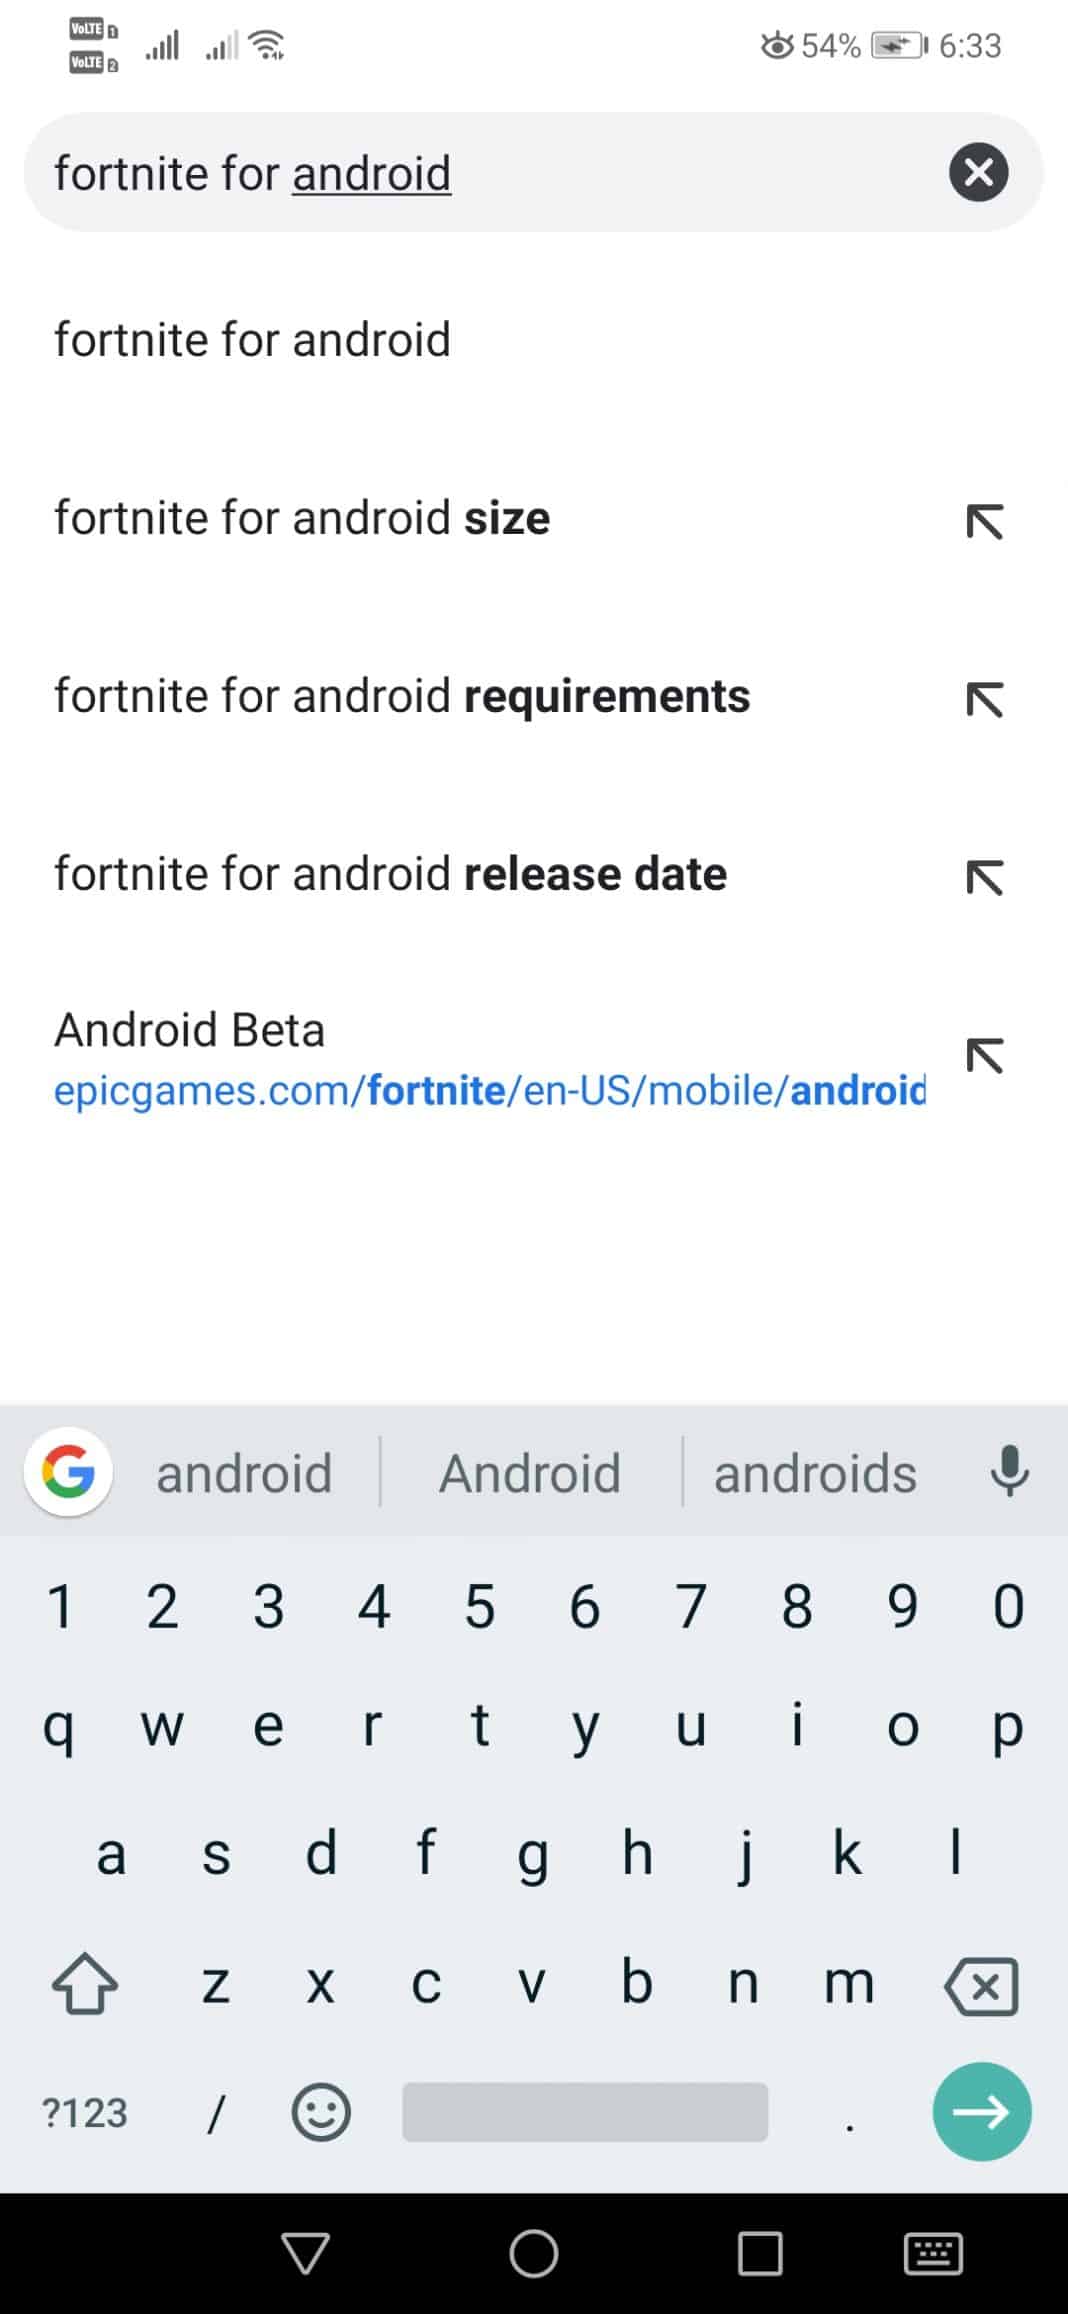 Search for 'Fortnite for Android'